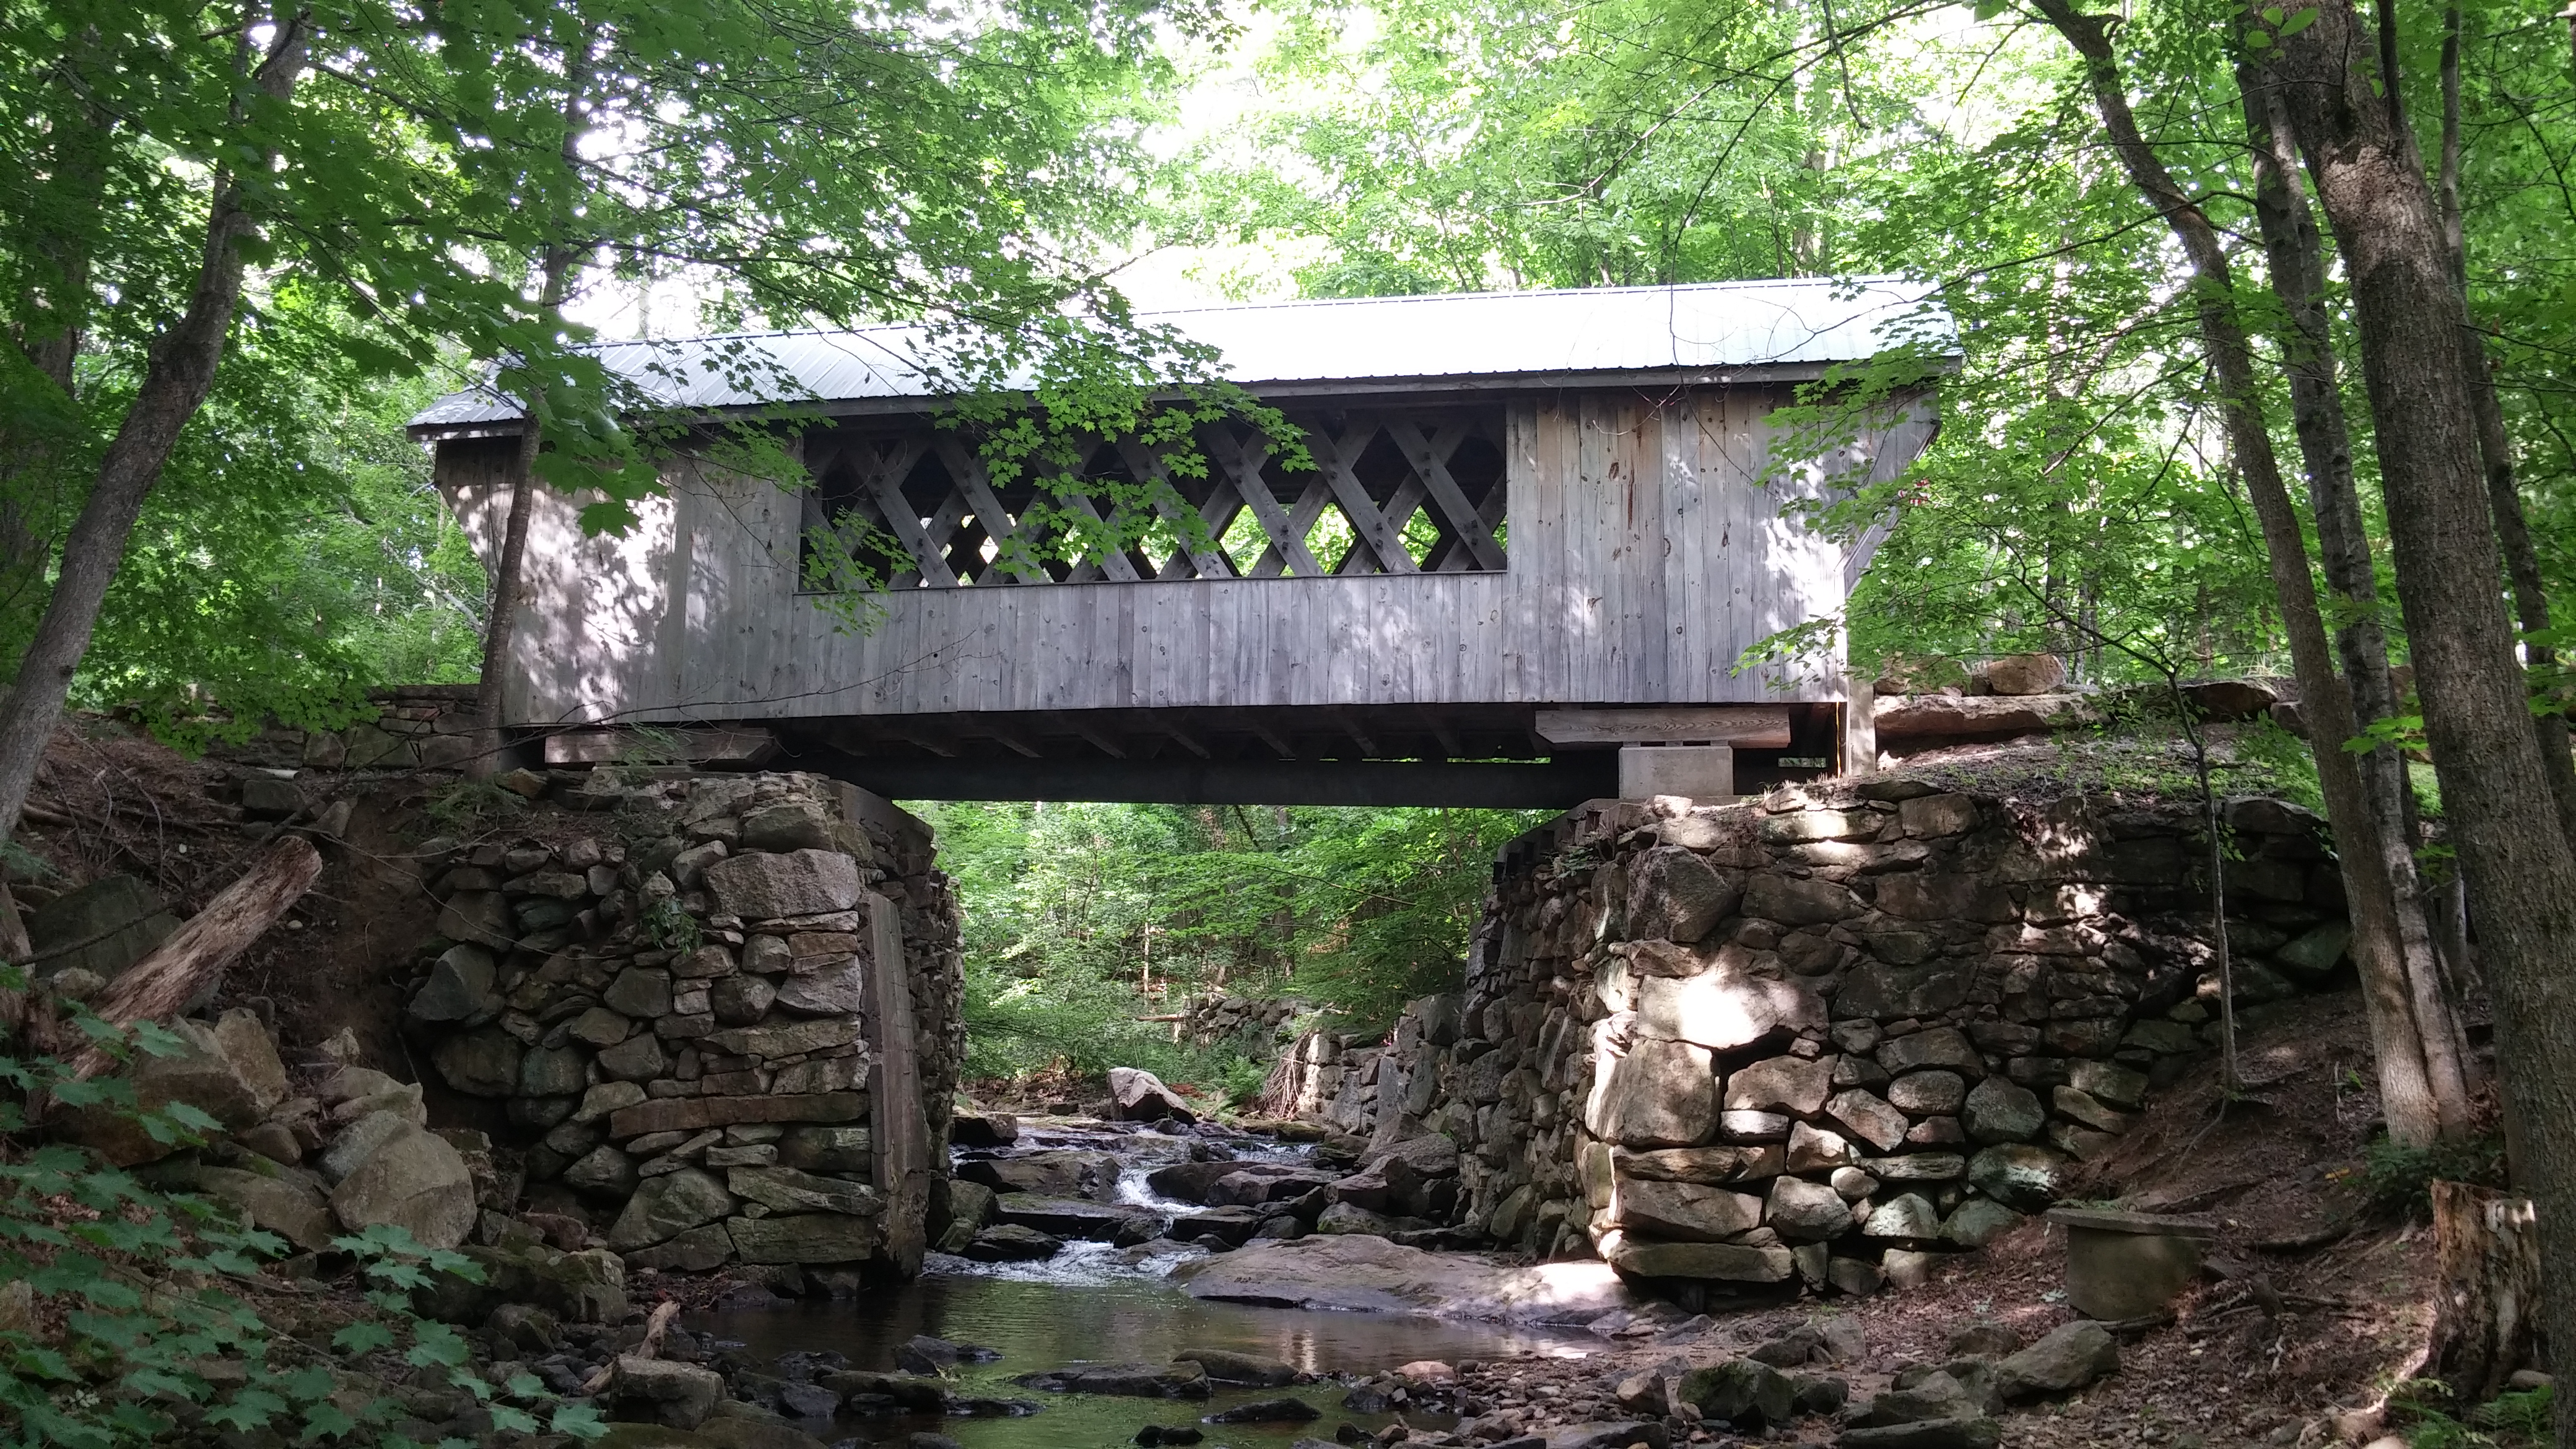 Tannery Hill Covered Bridge